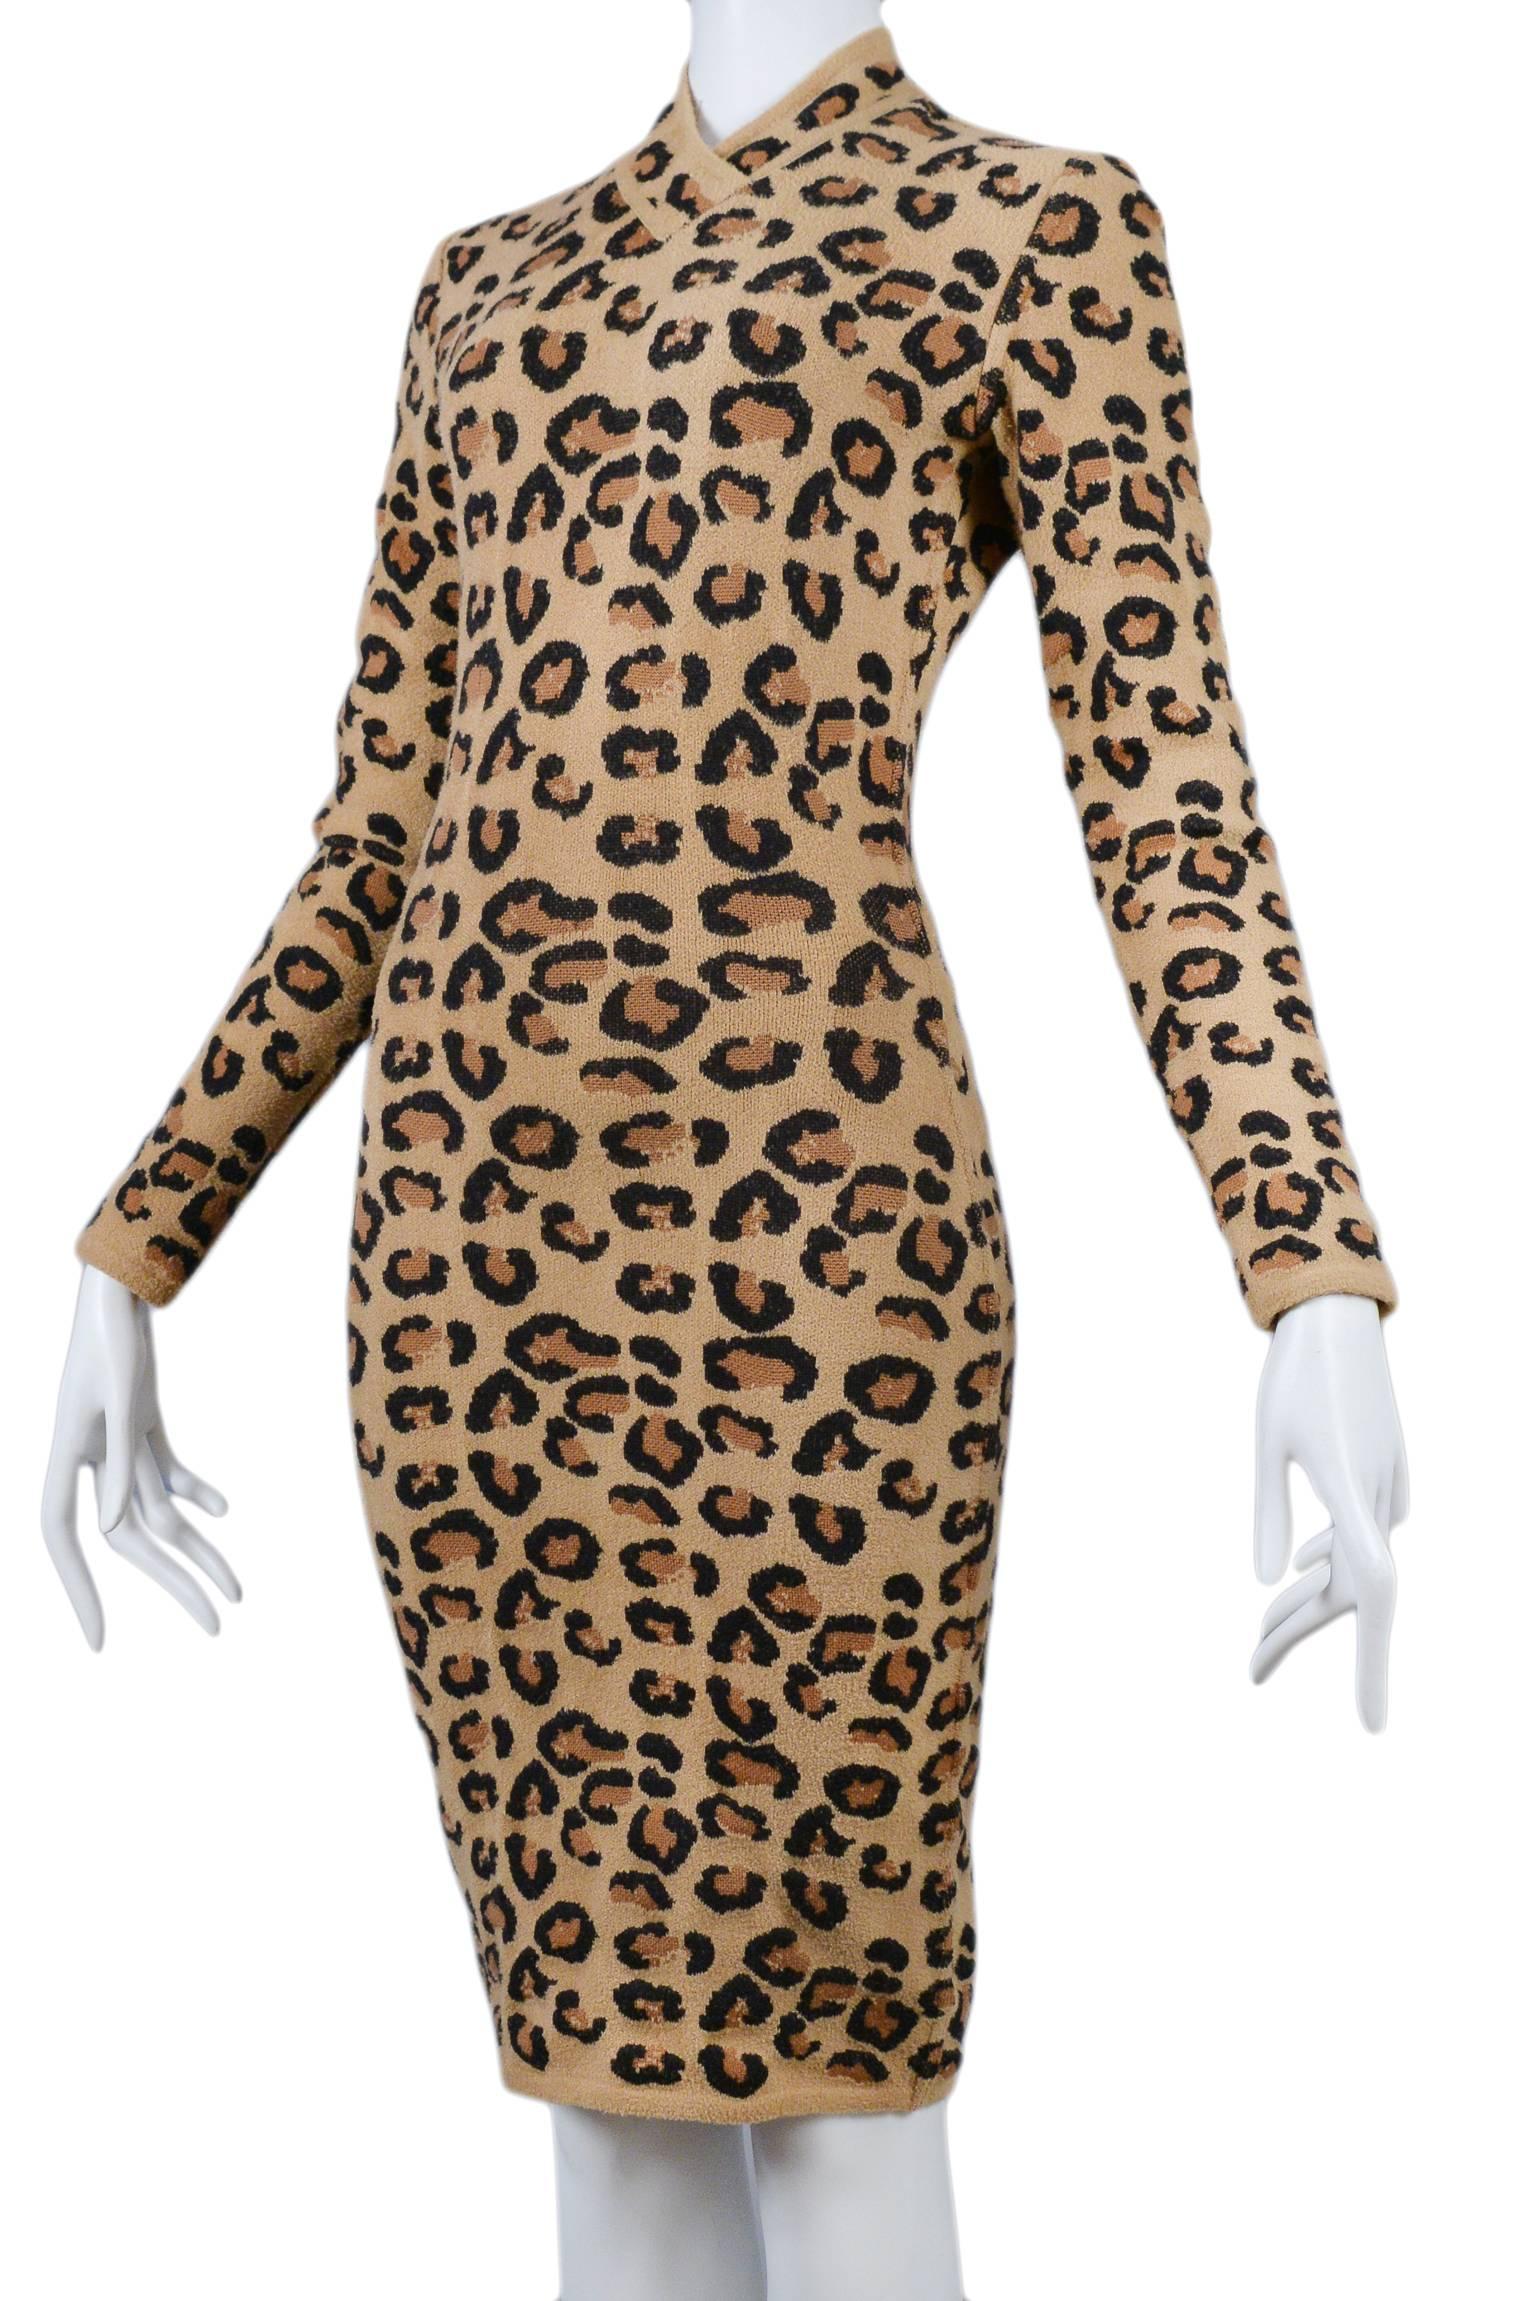 Brown Iconic Alaia Leopard Dress 1991-1992